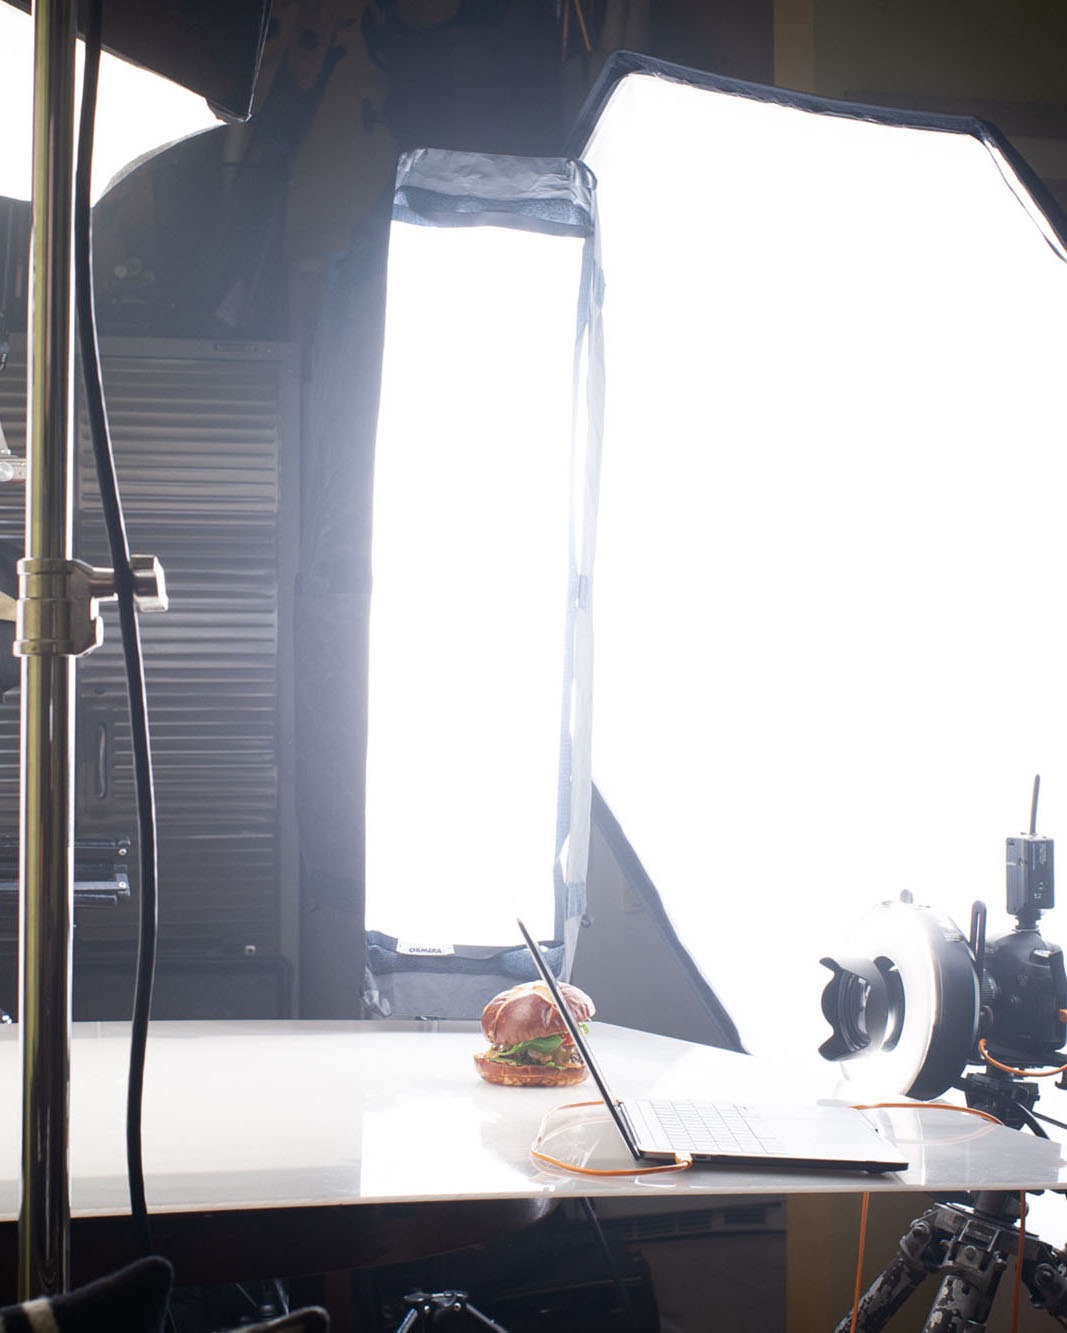 A behind the scenes view of a burger being photographed in a photo studio.